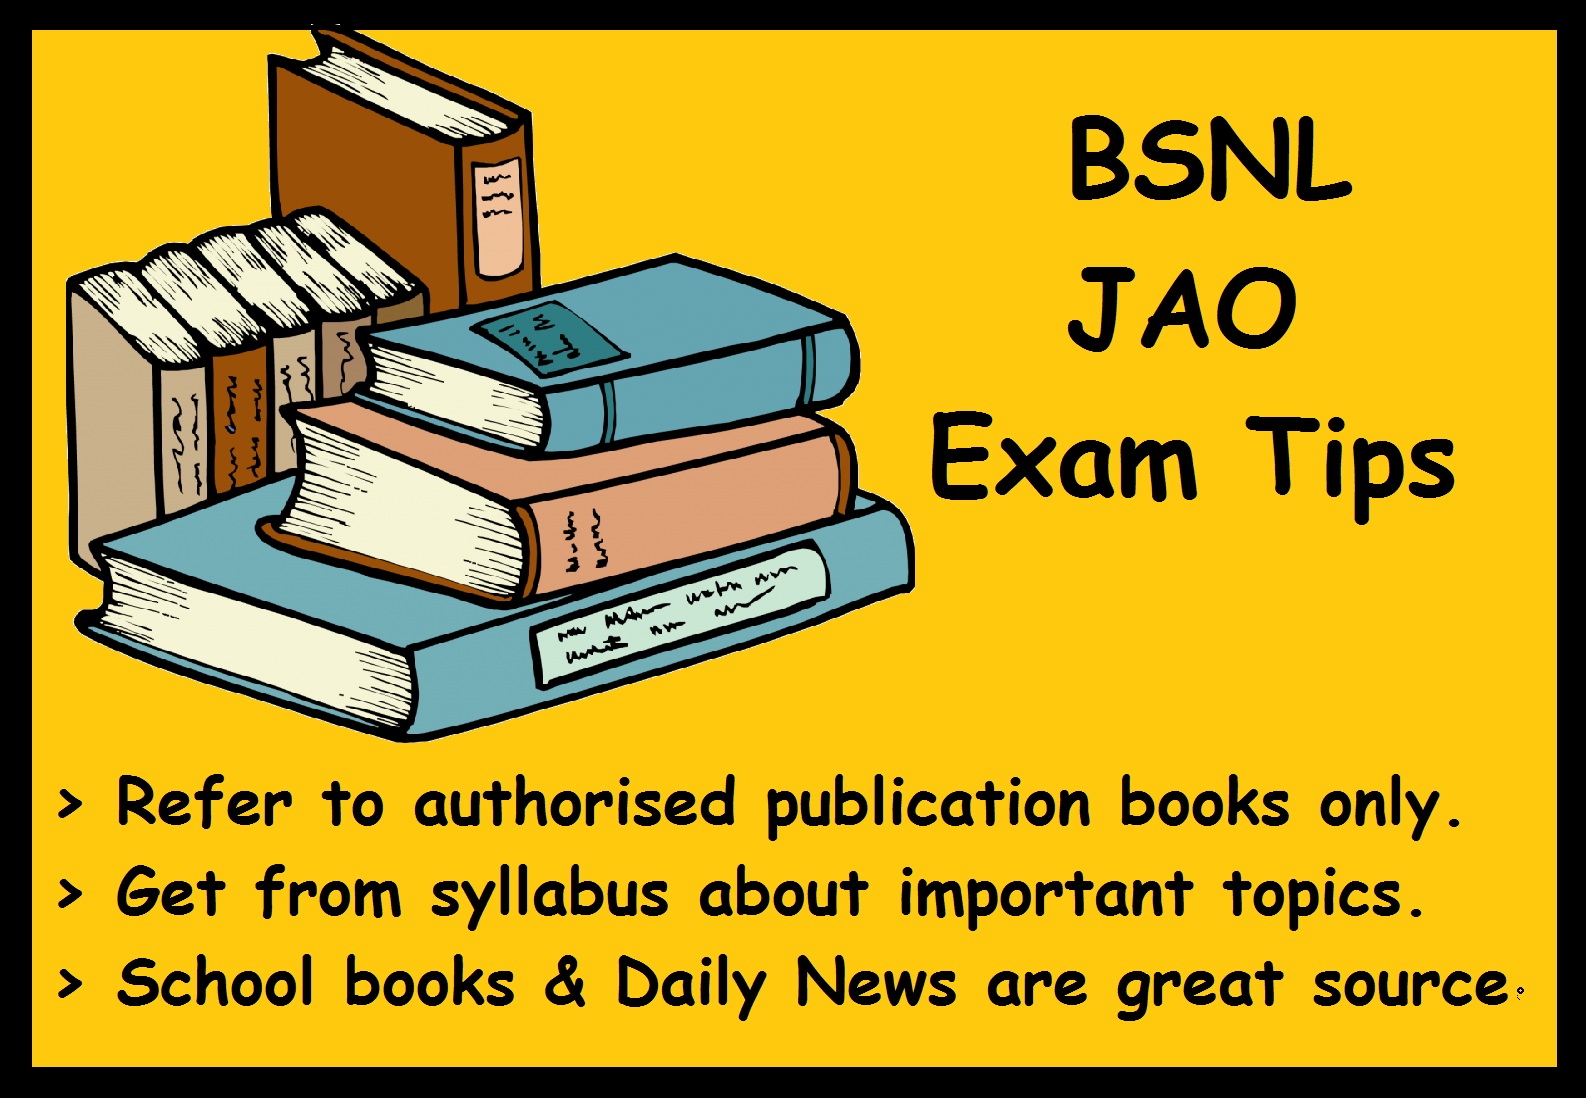 How To Prepare for BSNL JAO Exam- Tips, Books, Material